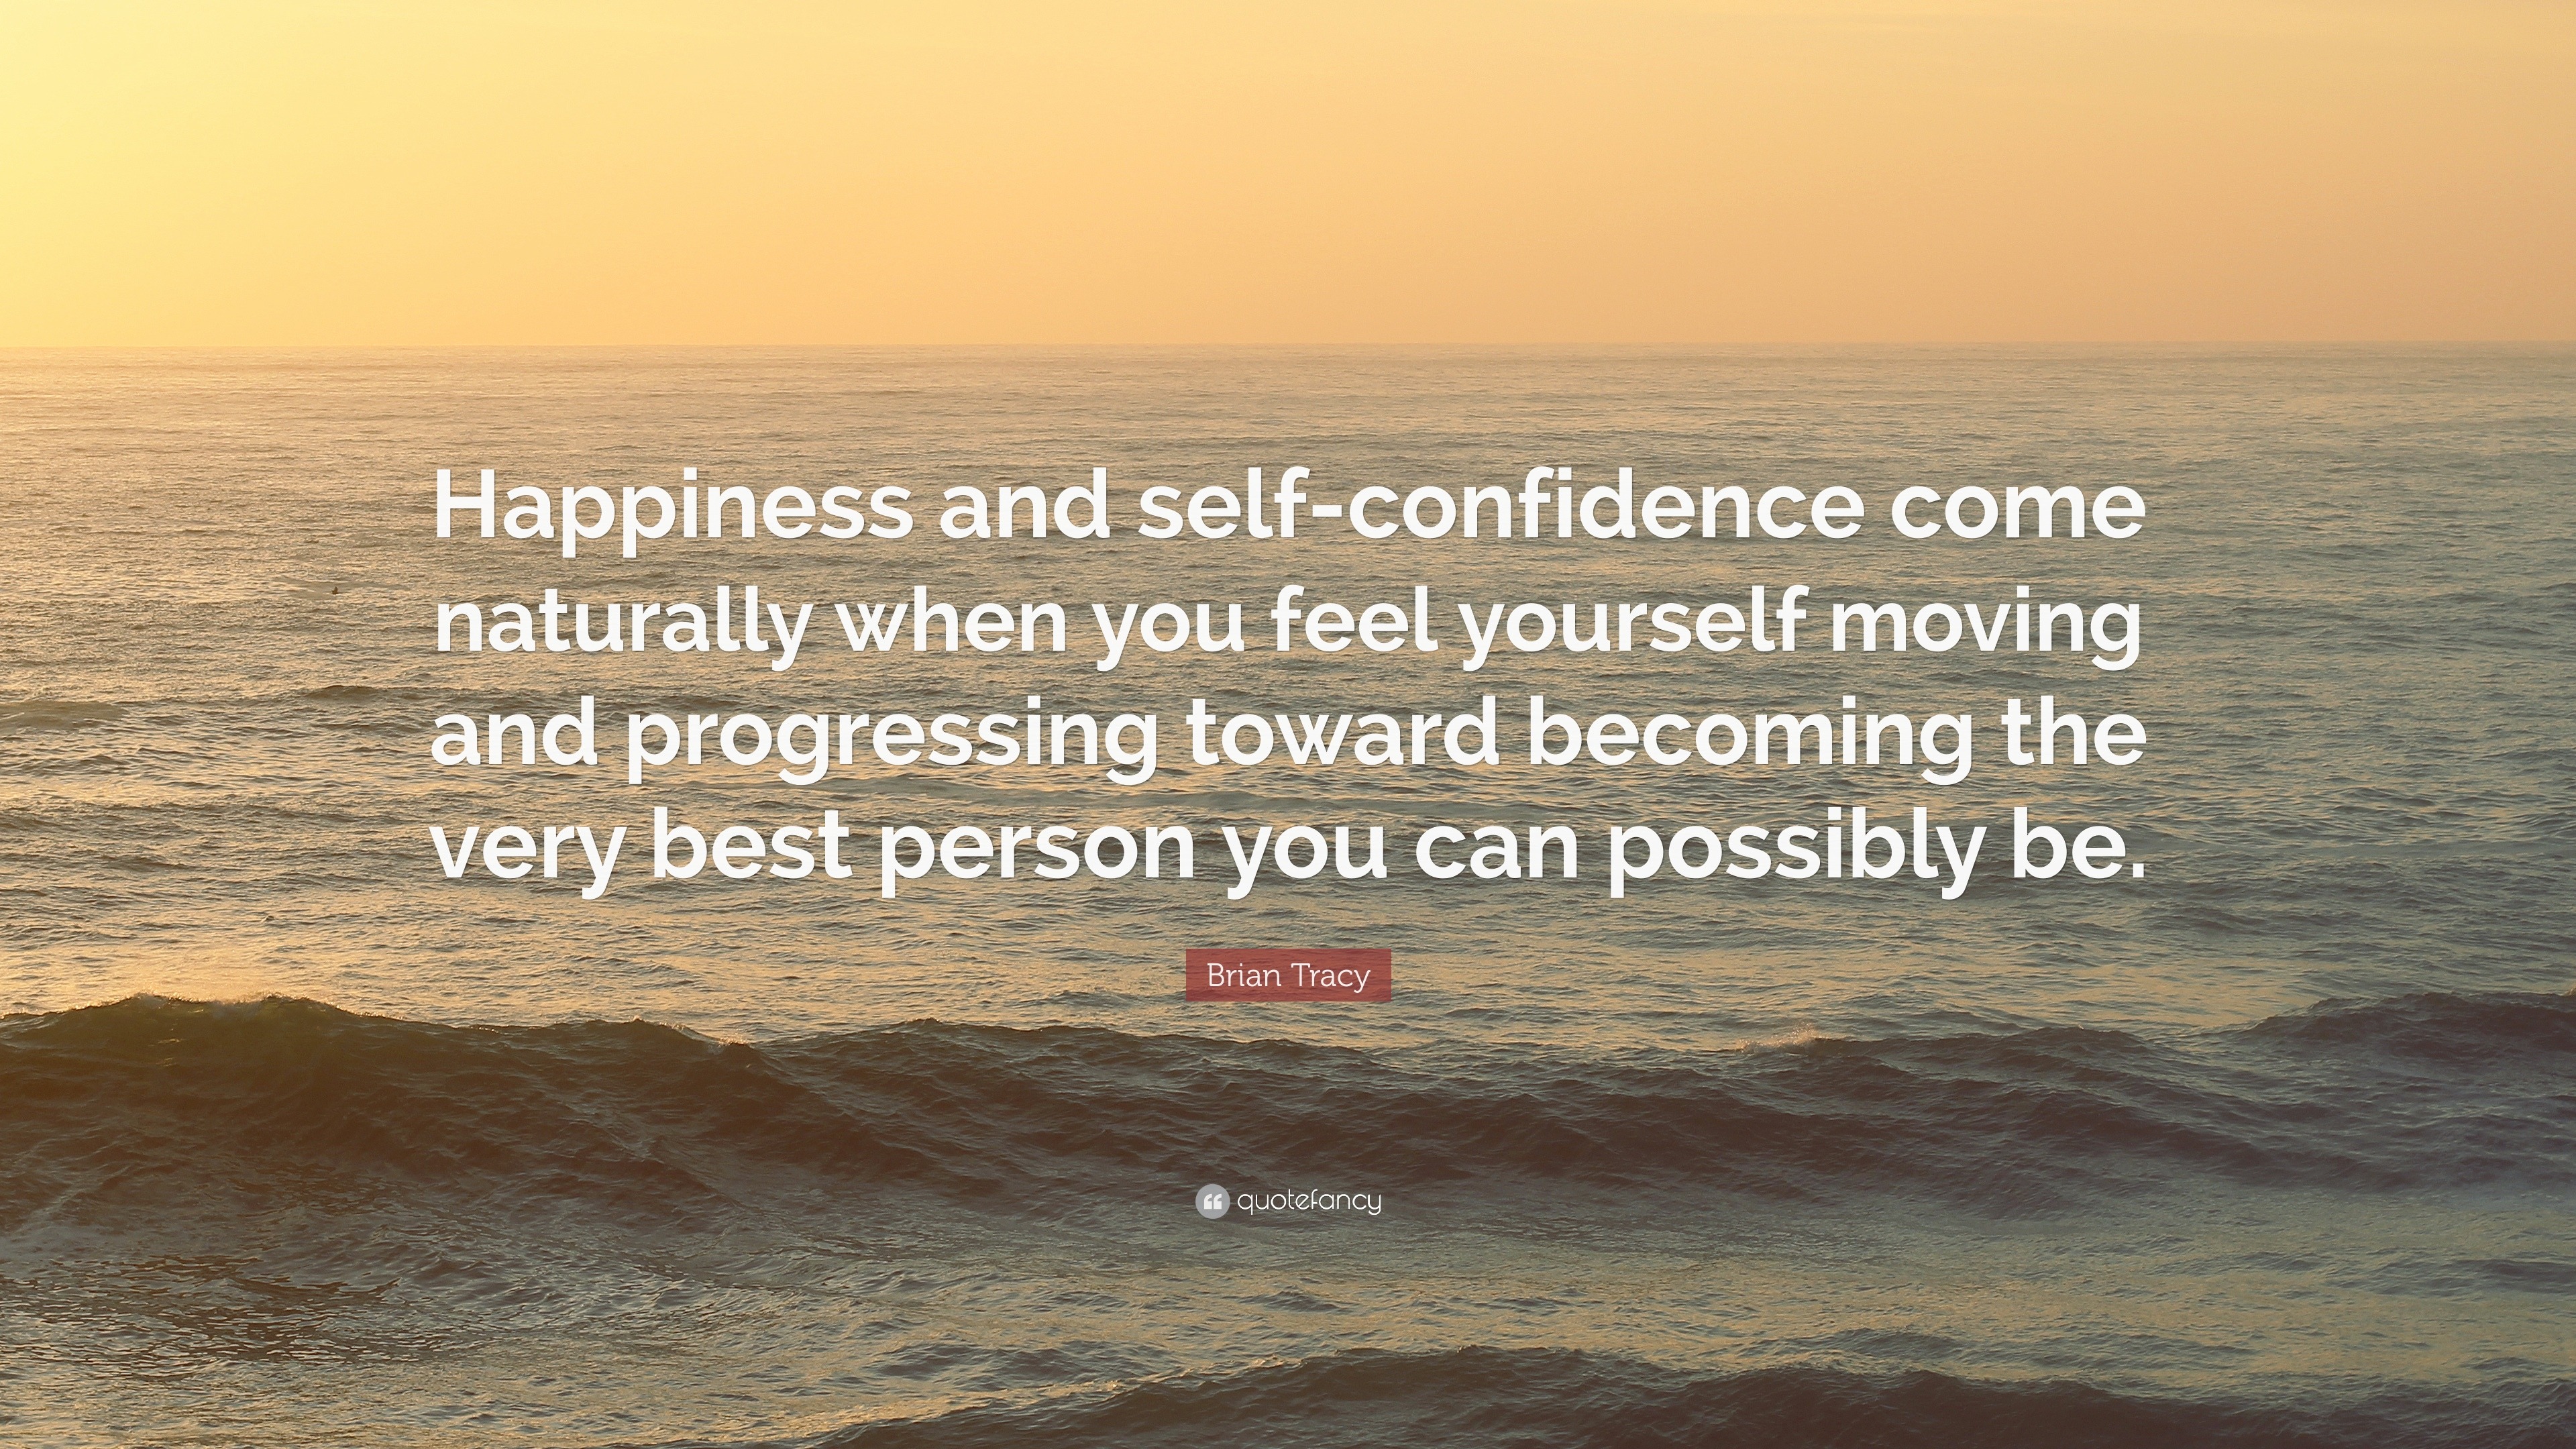 Brian Tracy Quote: “Happiness and self-confidence come naturally when